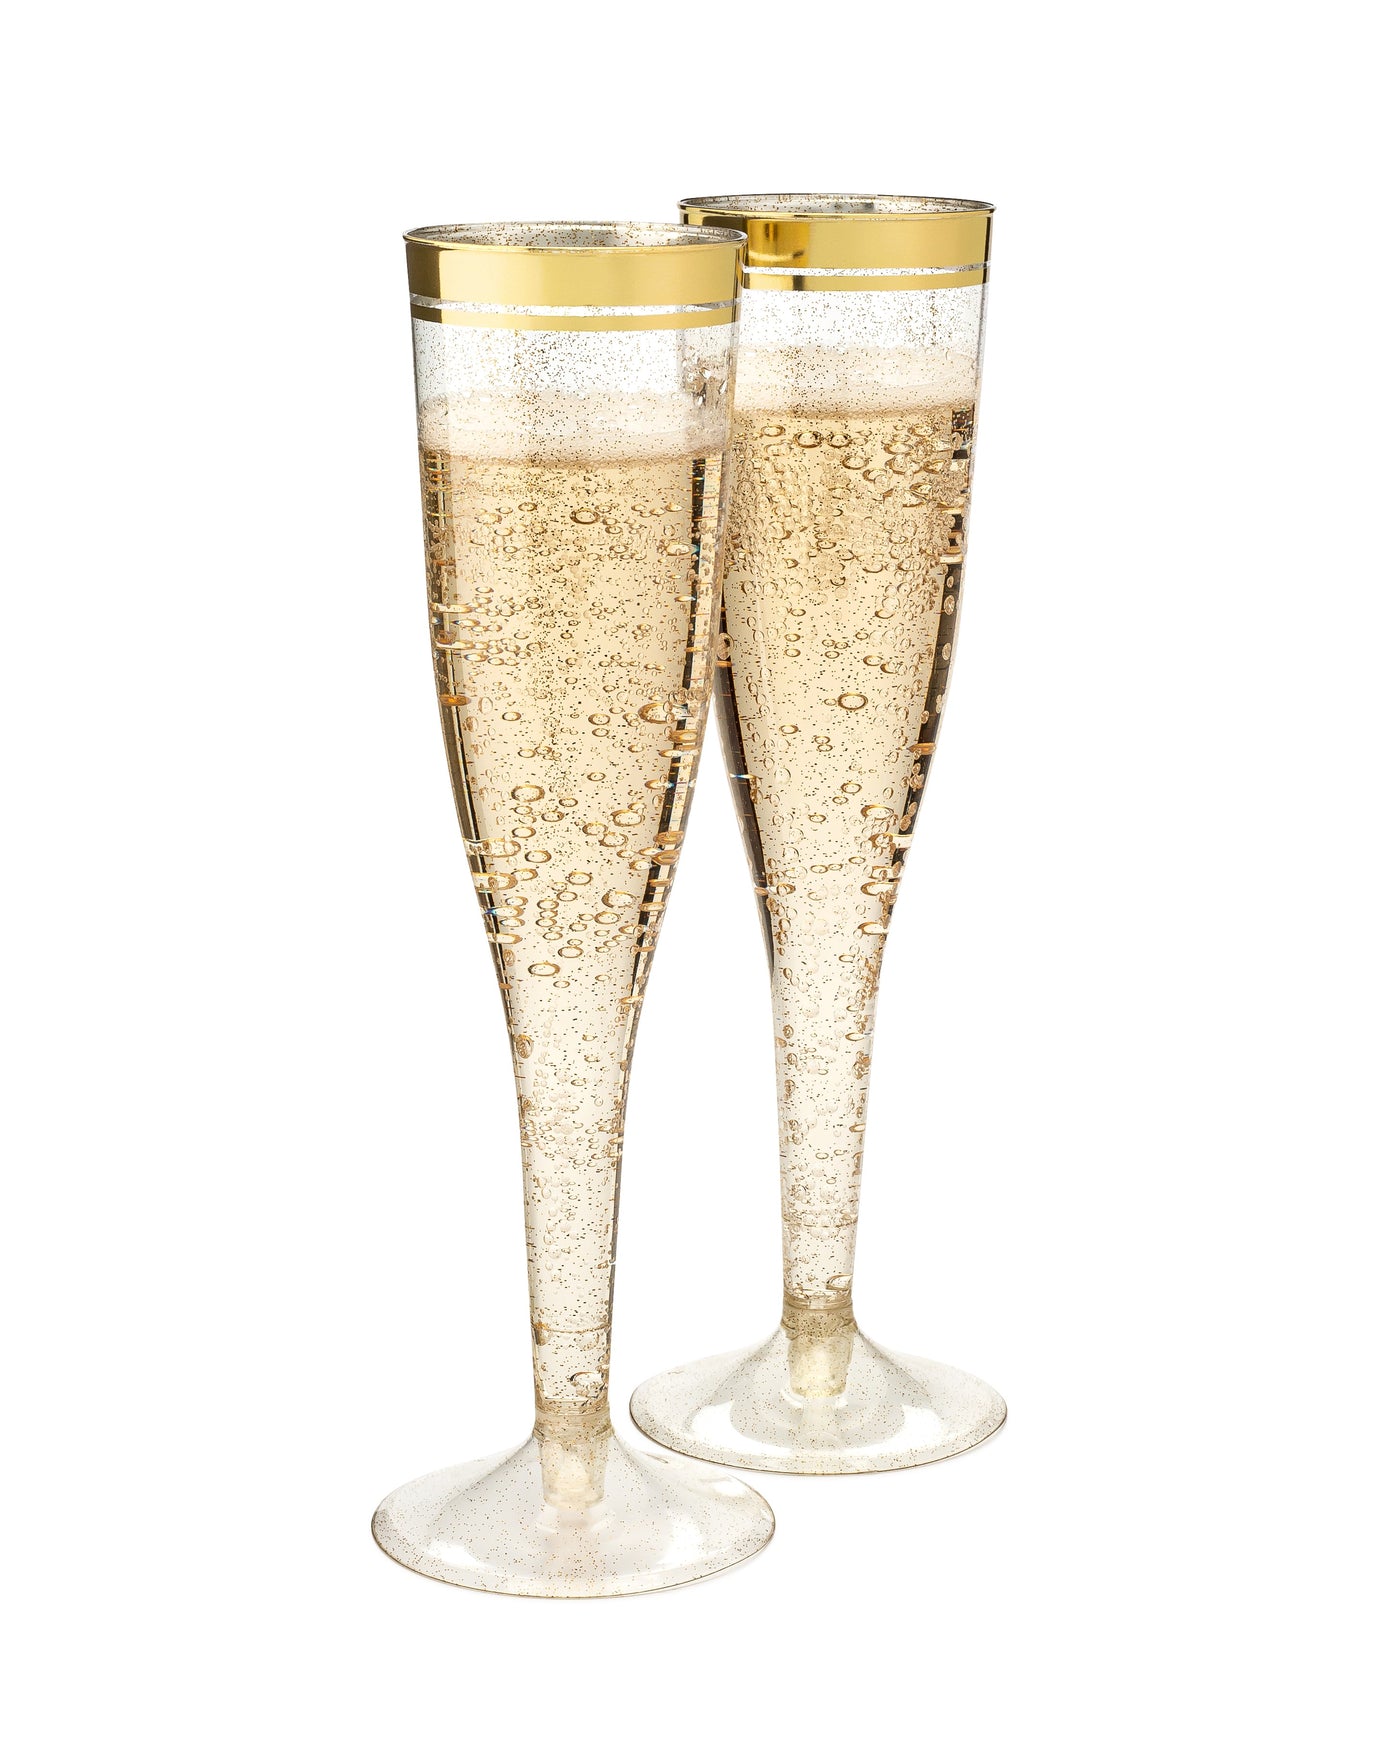 Perfect Settings 36 Pack Plastic Champagne Flutes Gold Glitter / Gold Rim | Disposable and Elegant Gold Glitter Glasses for Parties, Weddings, and Showers - Perfect Settings Tableware